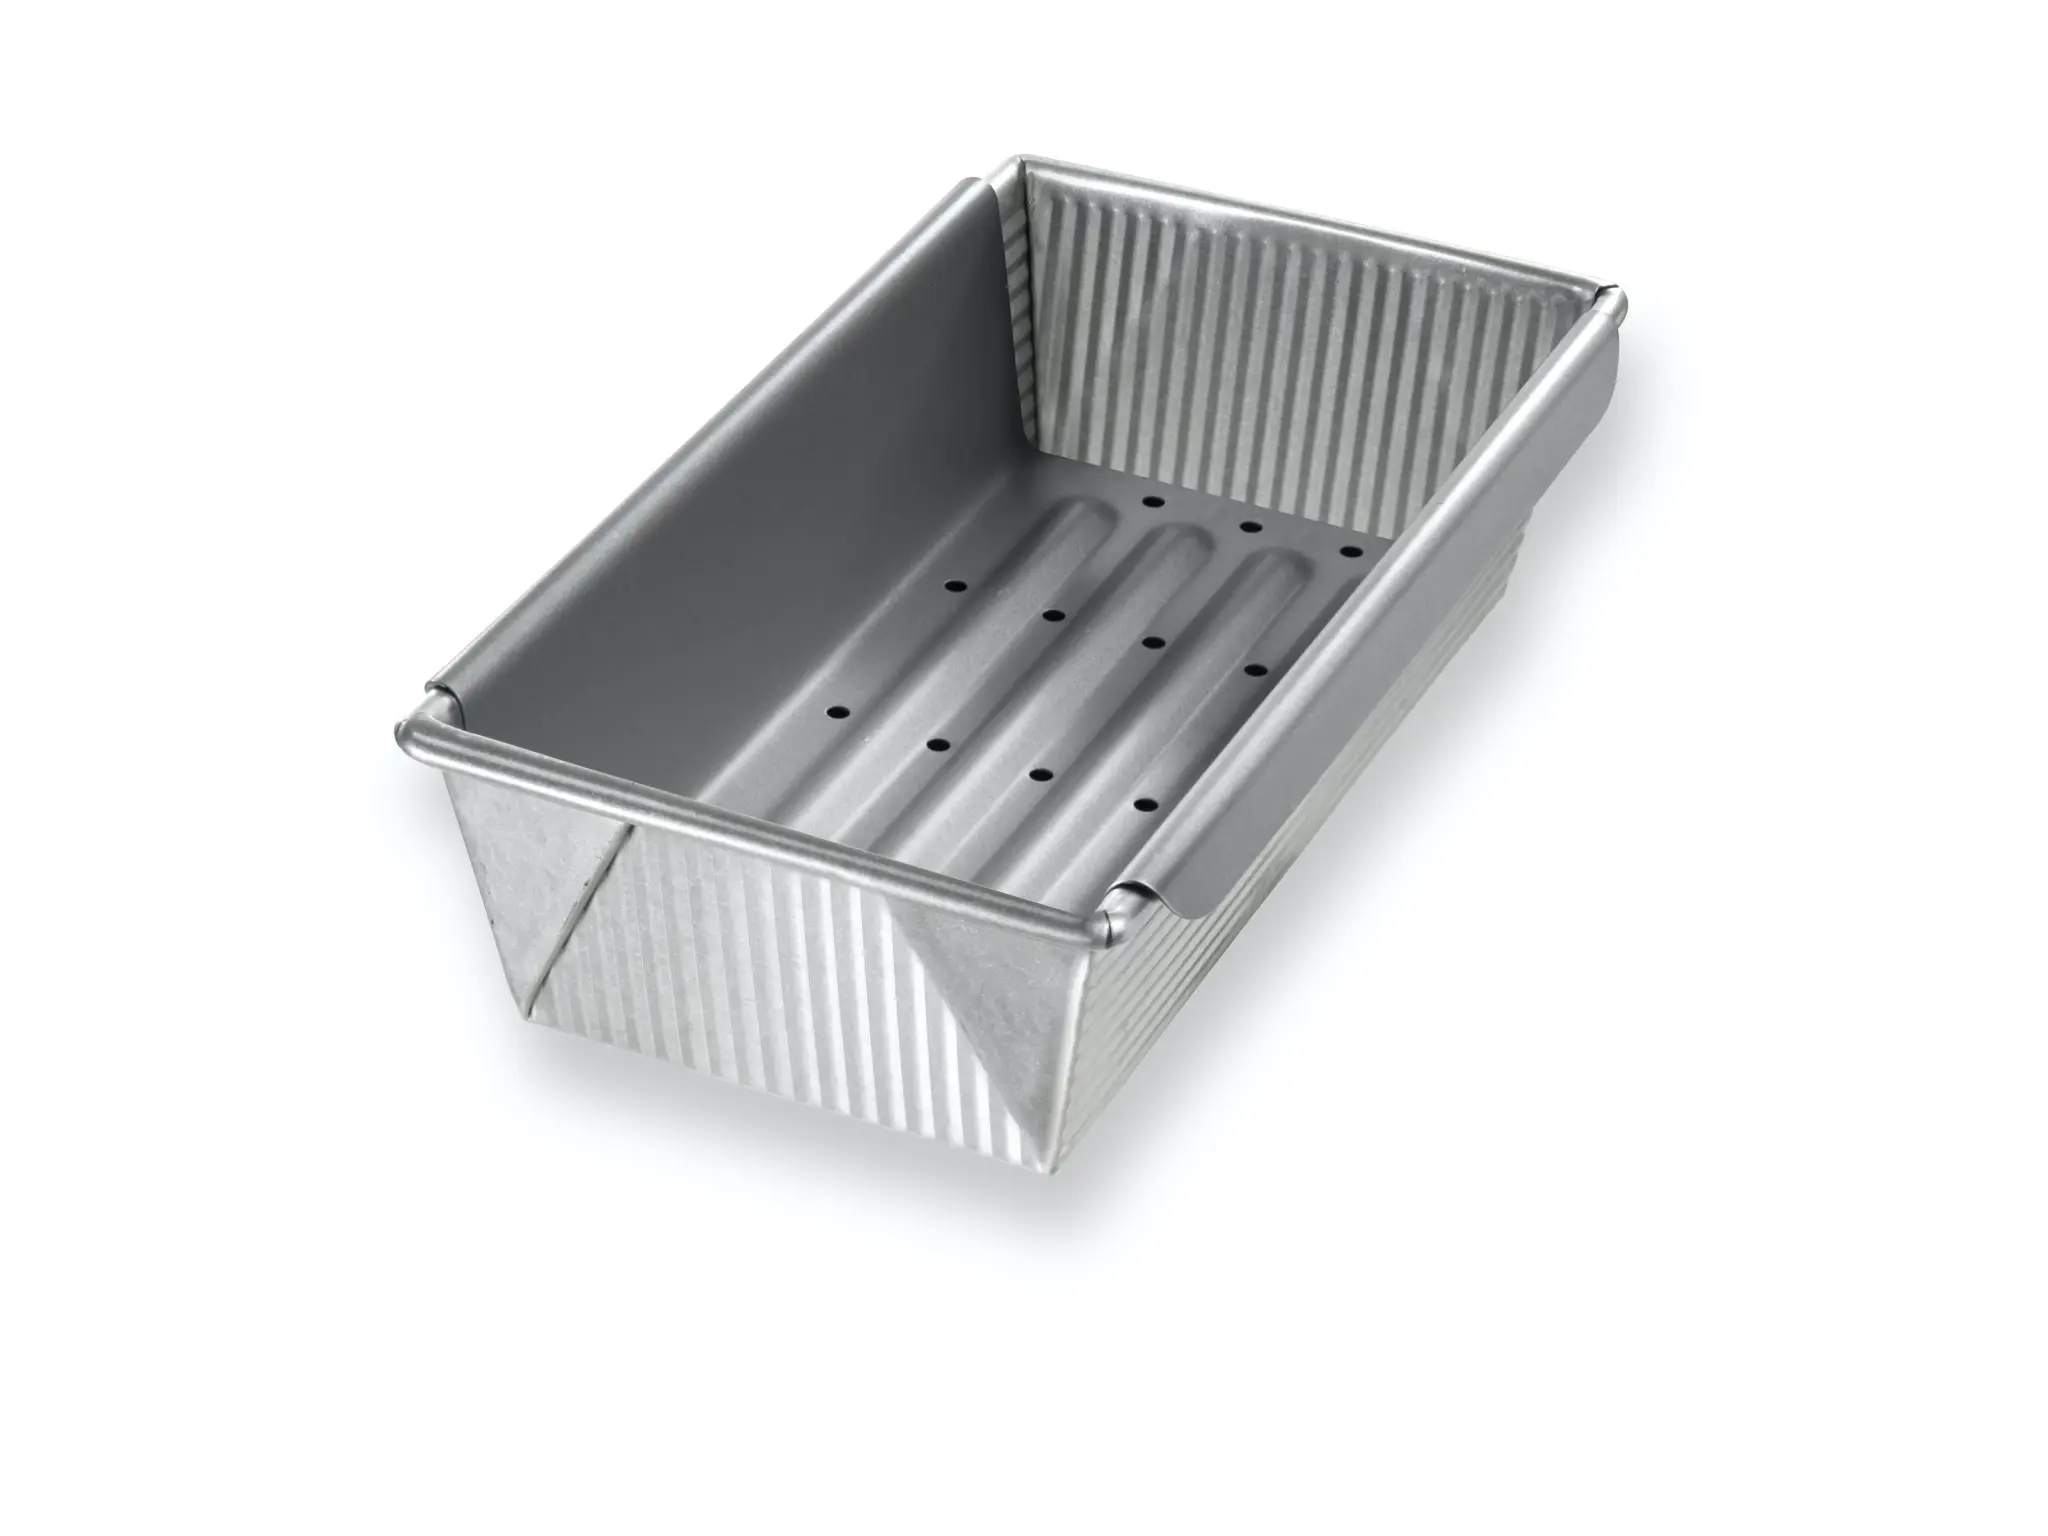 USA Pans Meat Loaf Pan w/ Insert